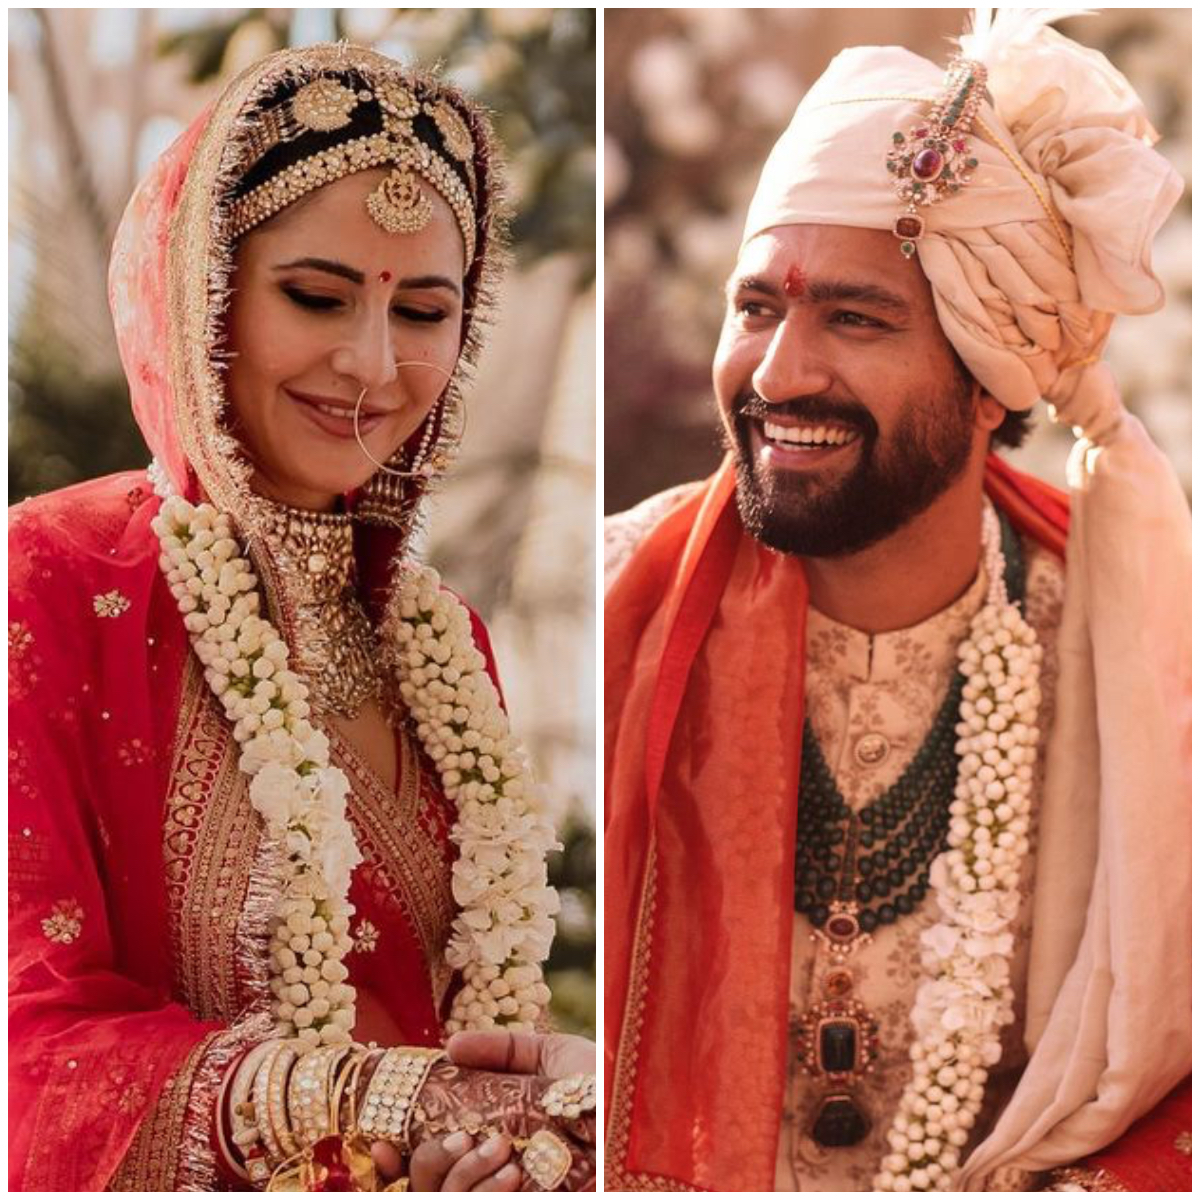 7 of Katrina Kaif, Vicky Kaushal&#039;s accessories, wedding dress details and the ADORABLE meaning behind them